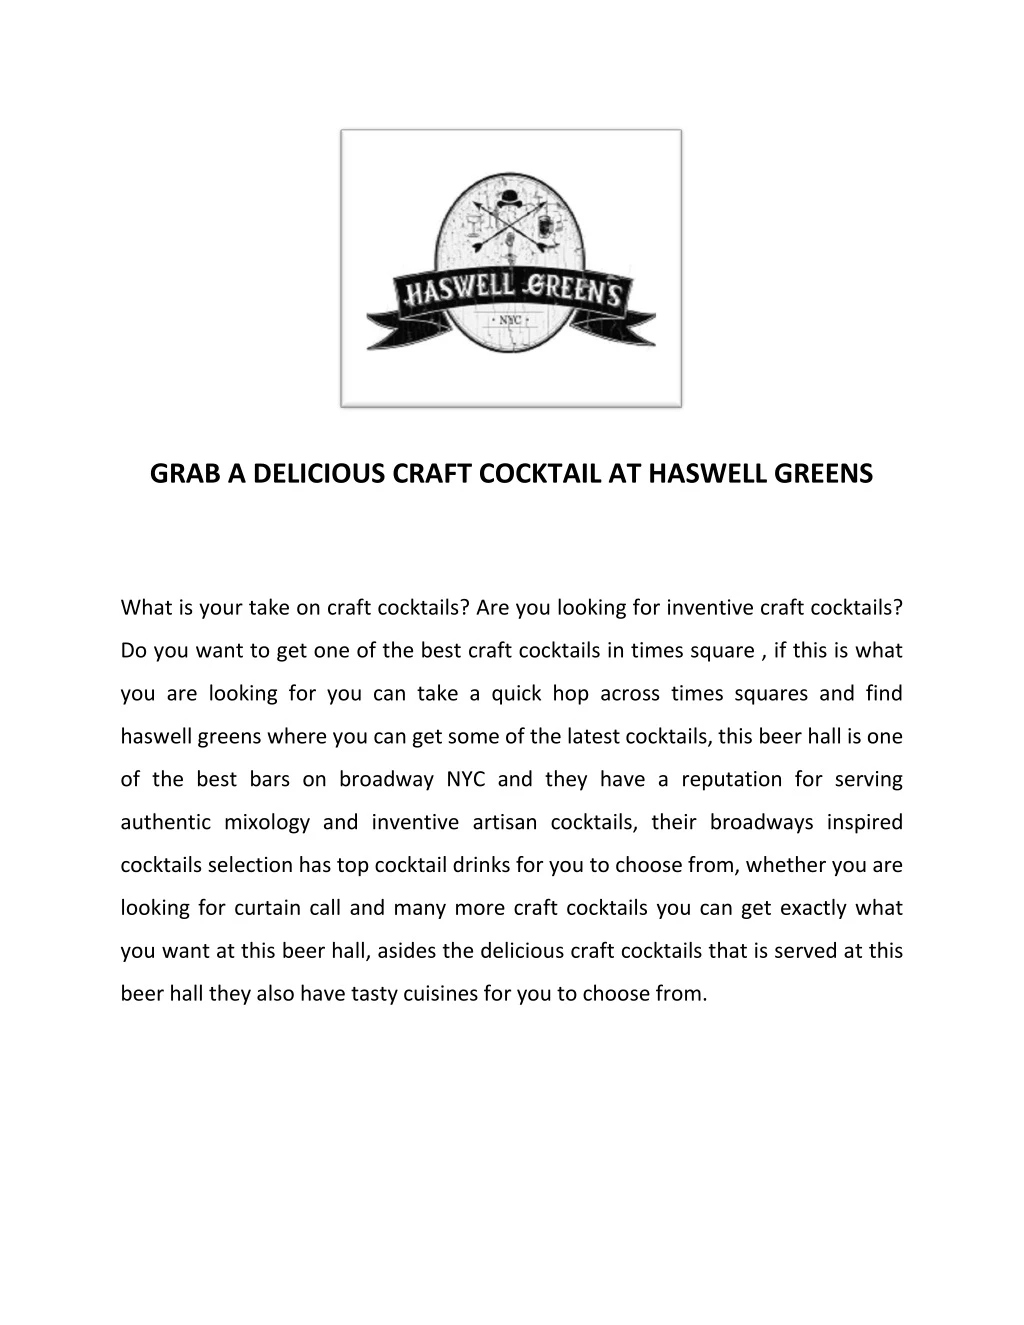 grab a delicious craft cocktail at haswell greens